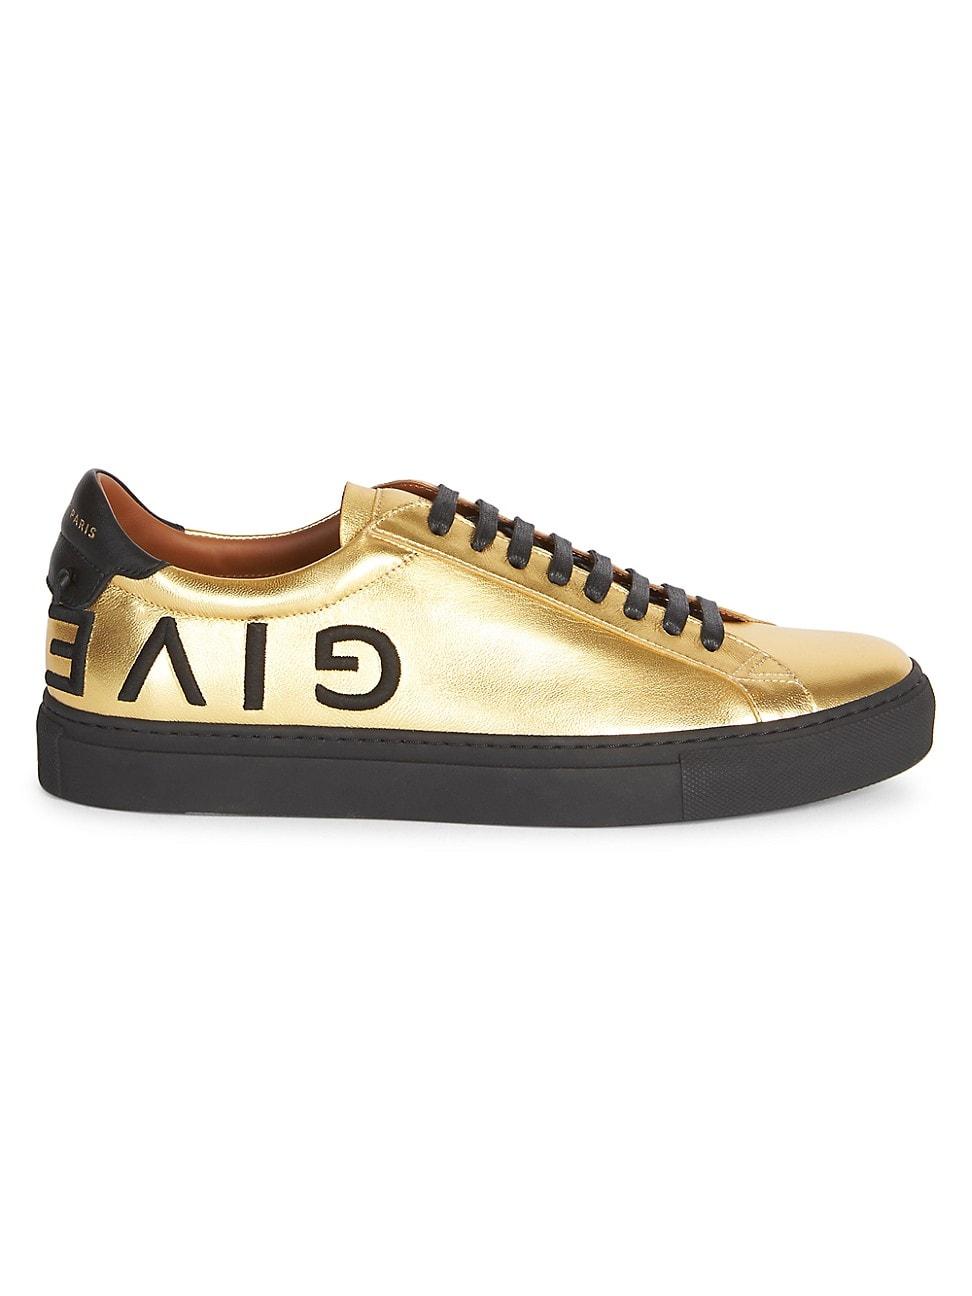 Givenchy Leather Urban Street Low Sneakers in Gold (Metallic) for Men - Lyst